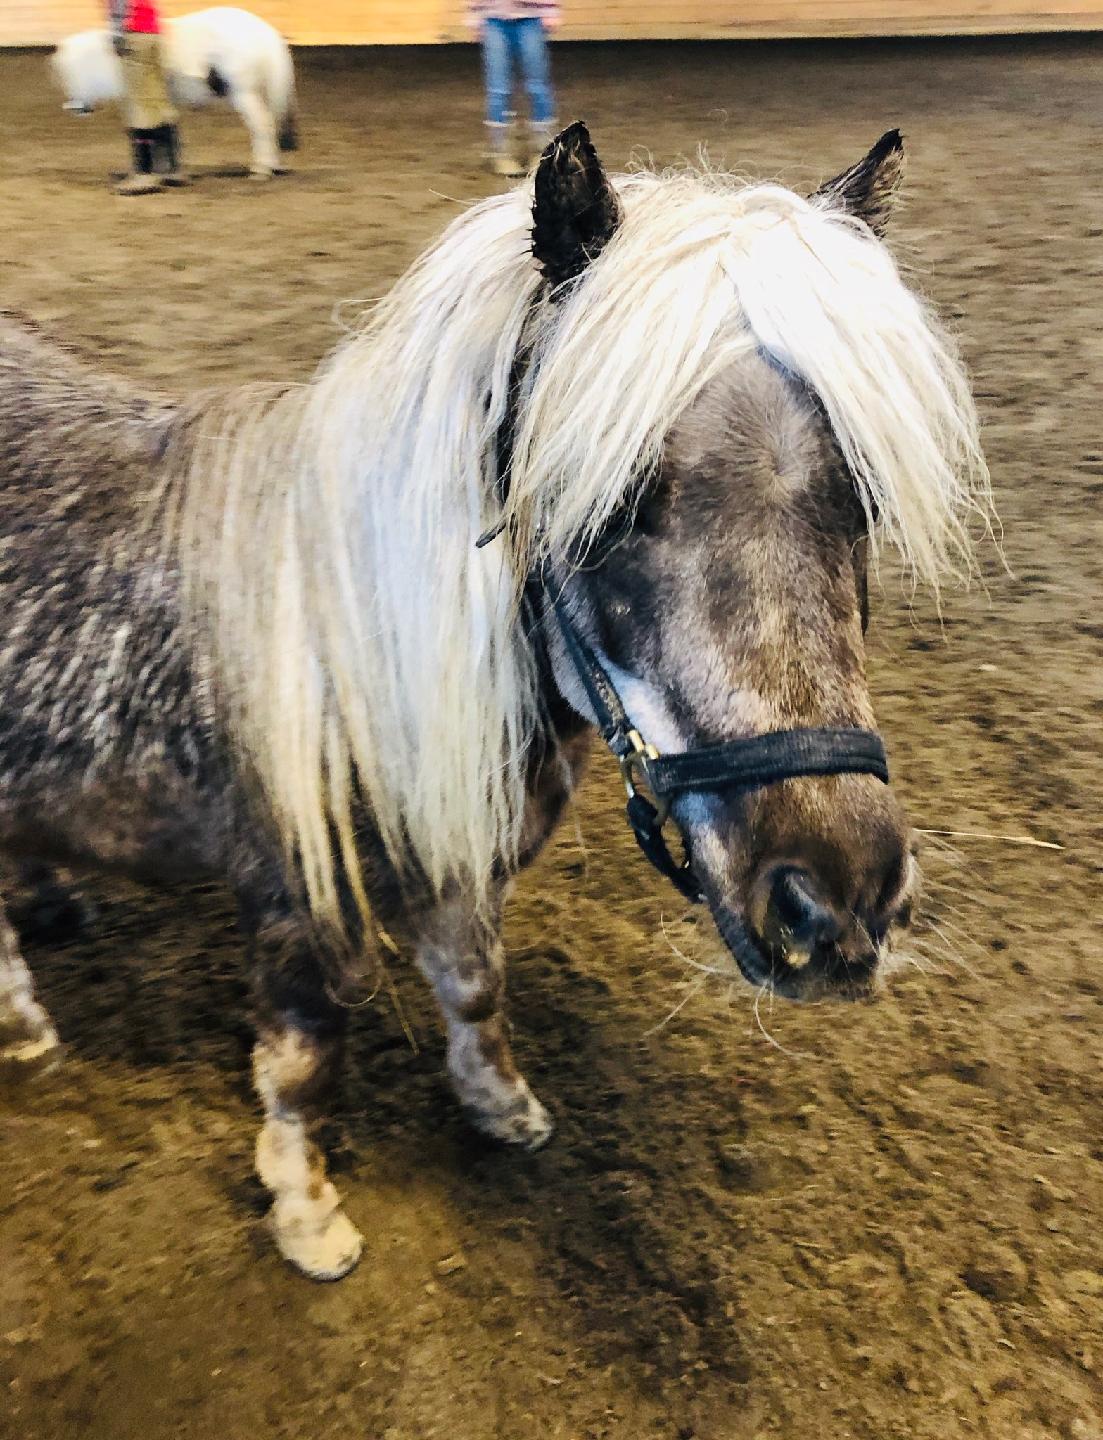 A close up of a dappled gray miniature horse with a long white mane and forelock